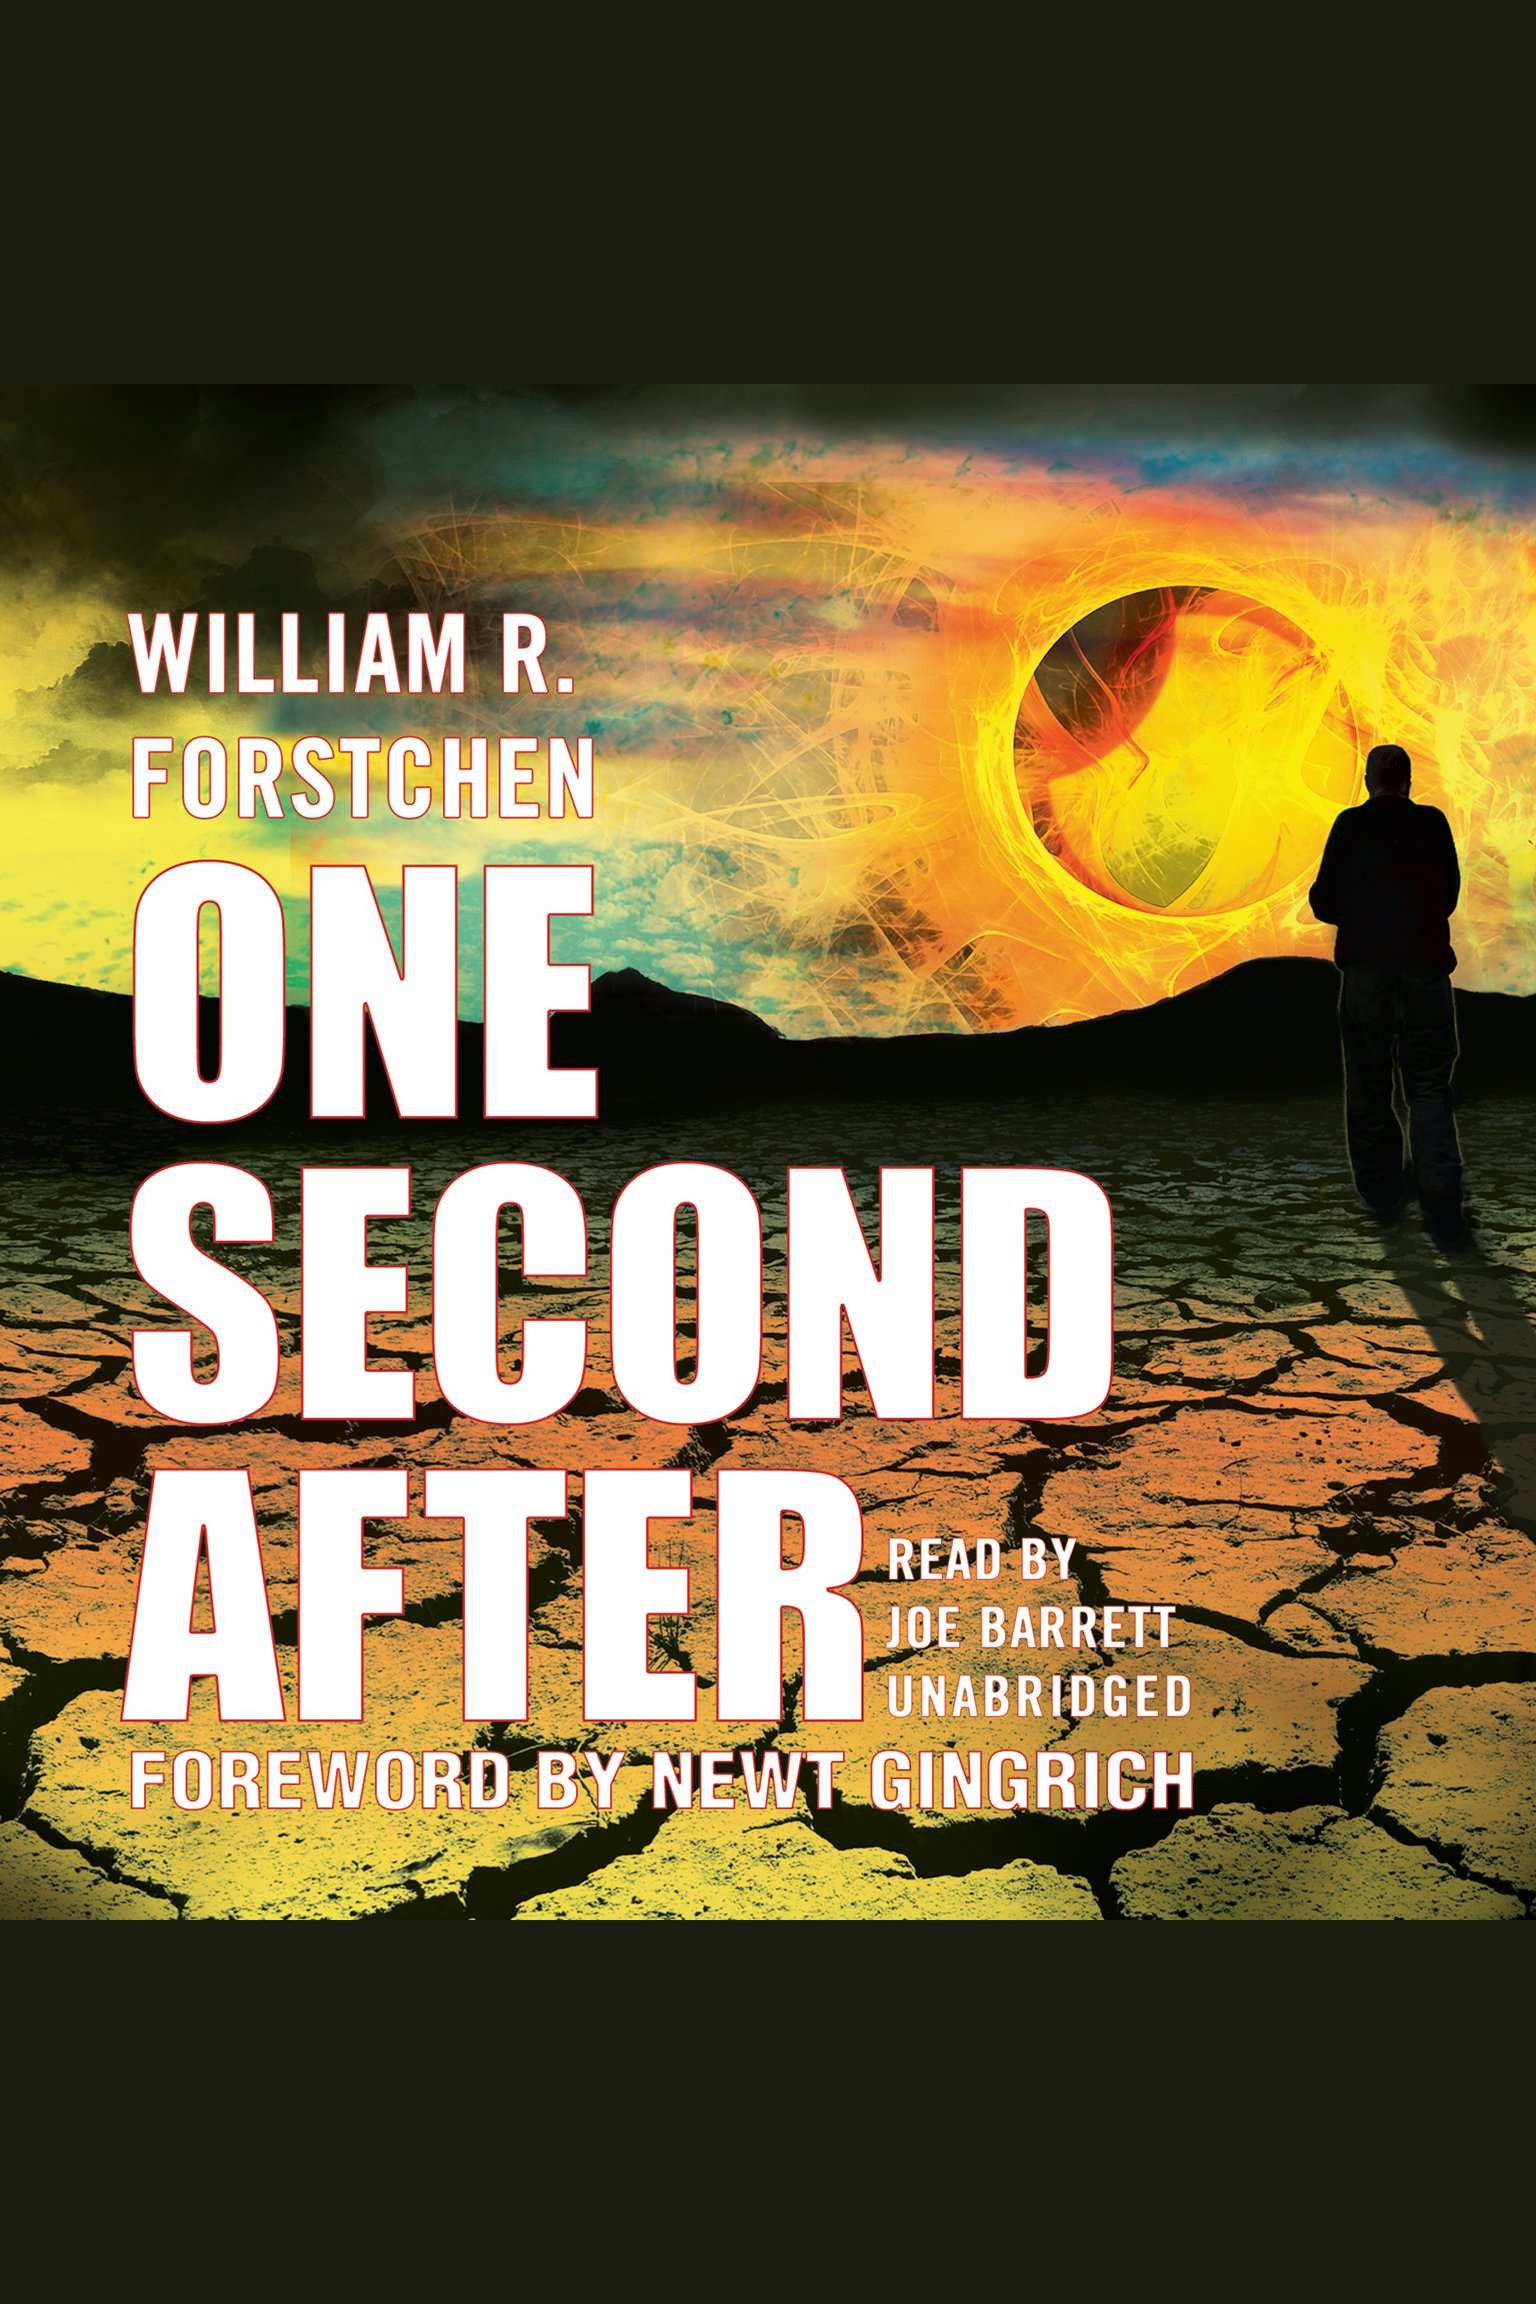 One second after cover image